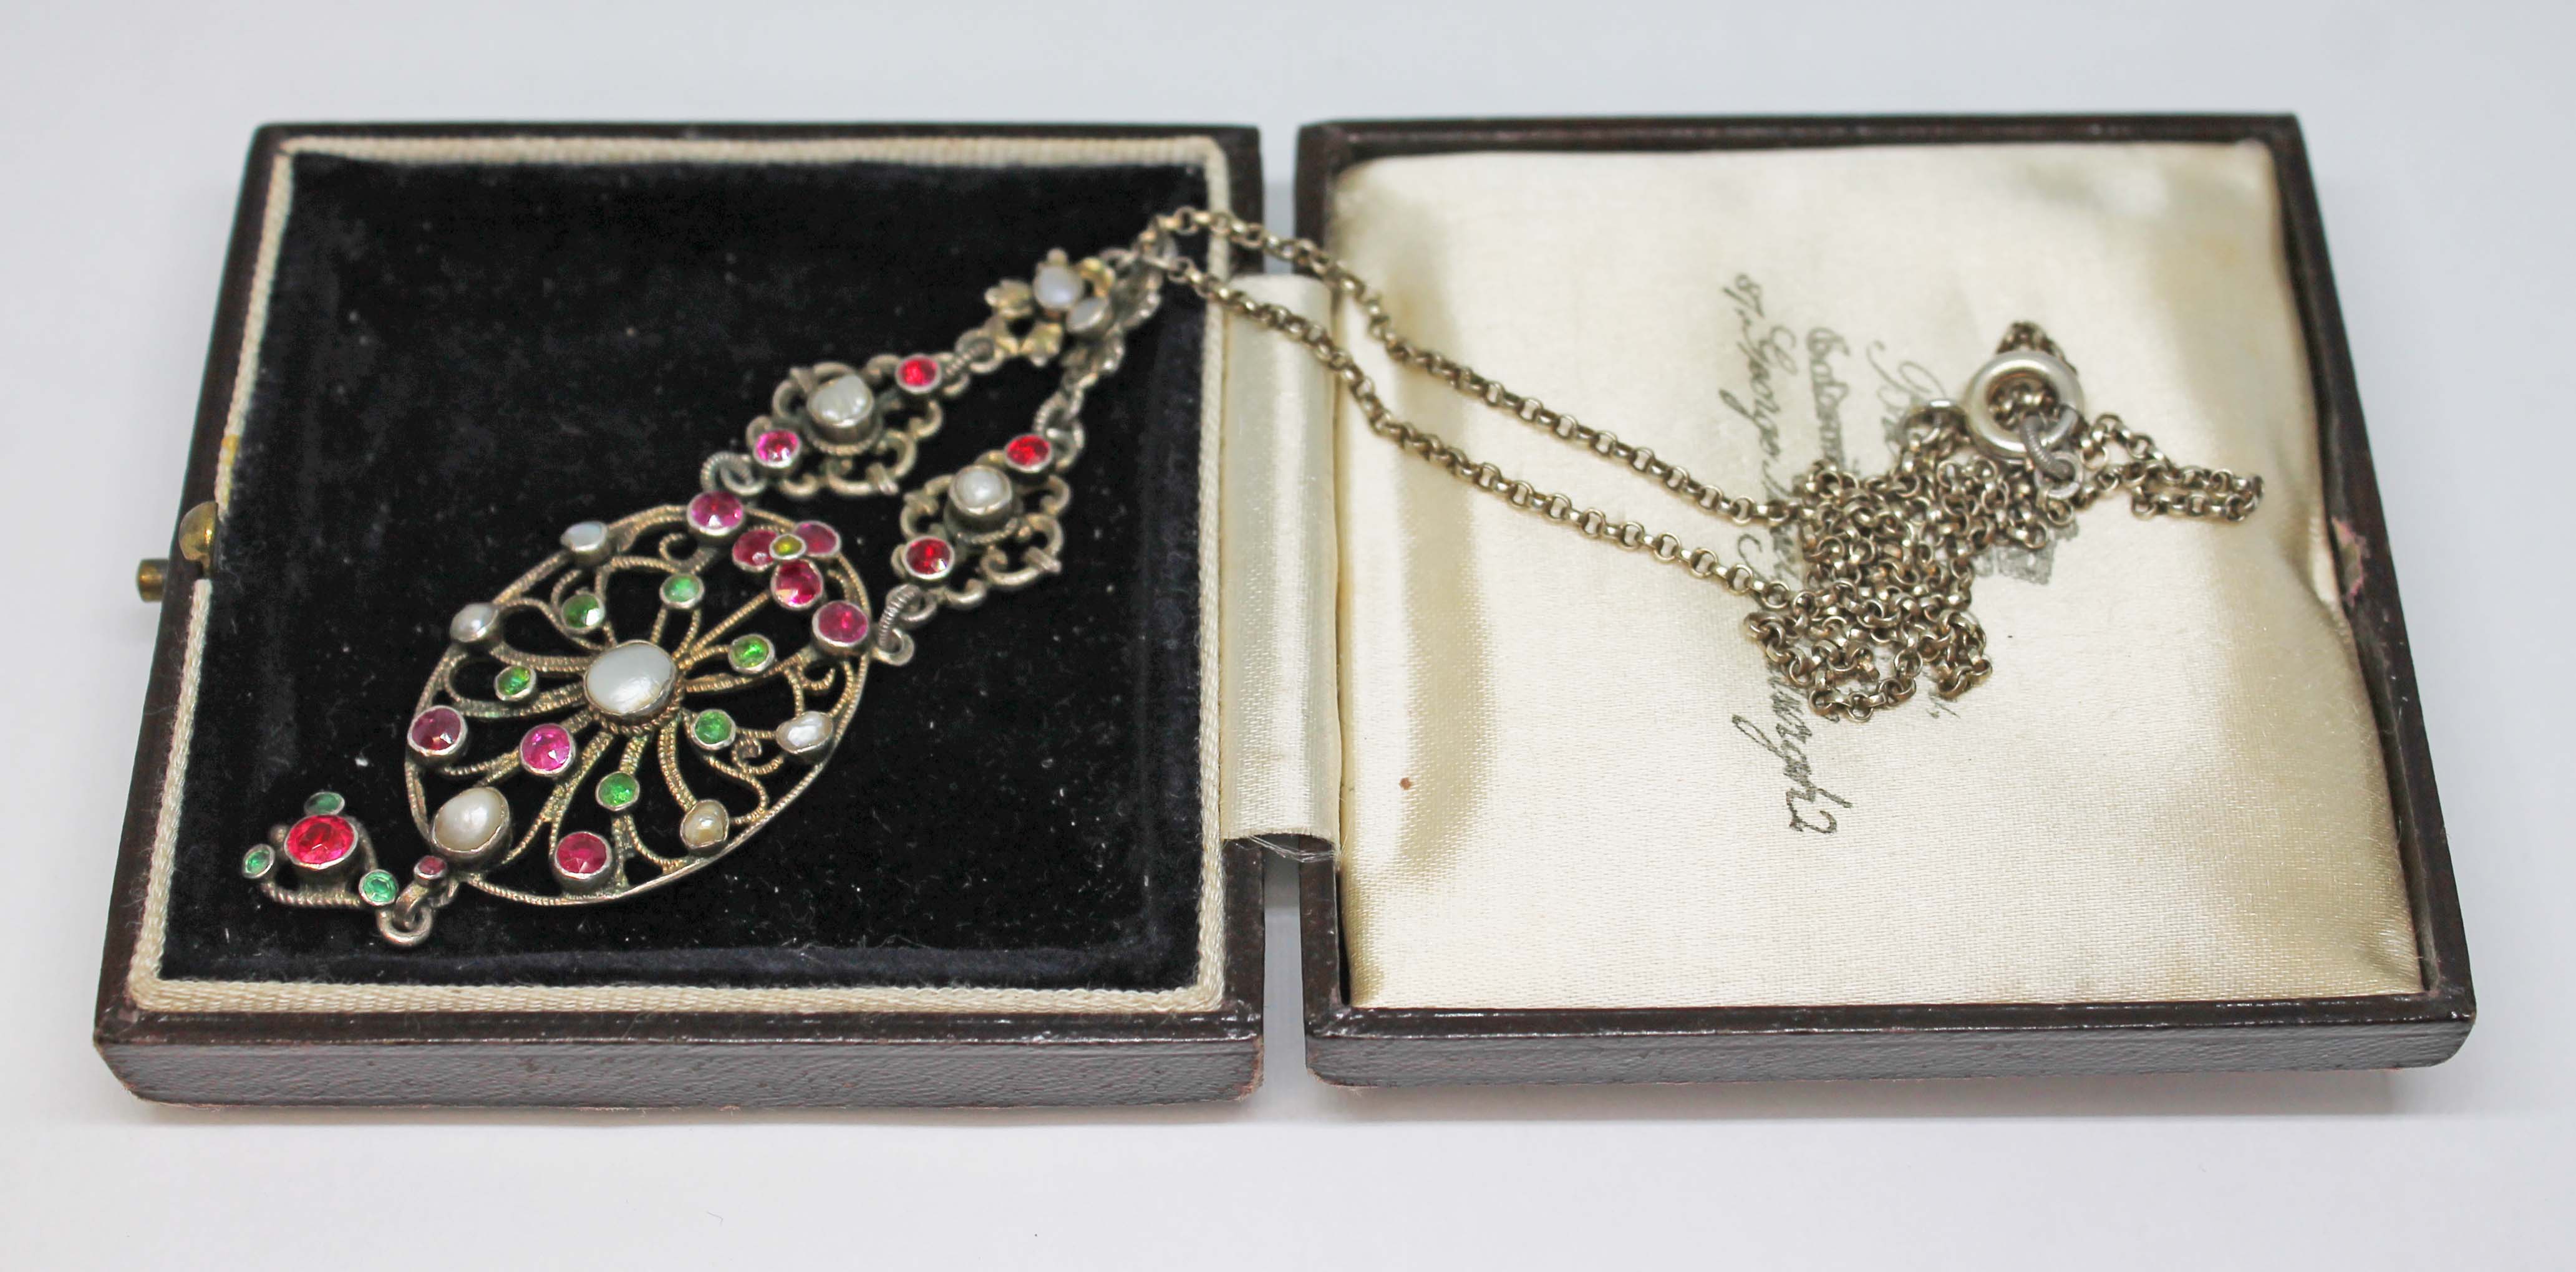 A filigree pendant set with rubies, paste, pearls and green stones, white metal, unmarked, chain